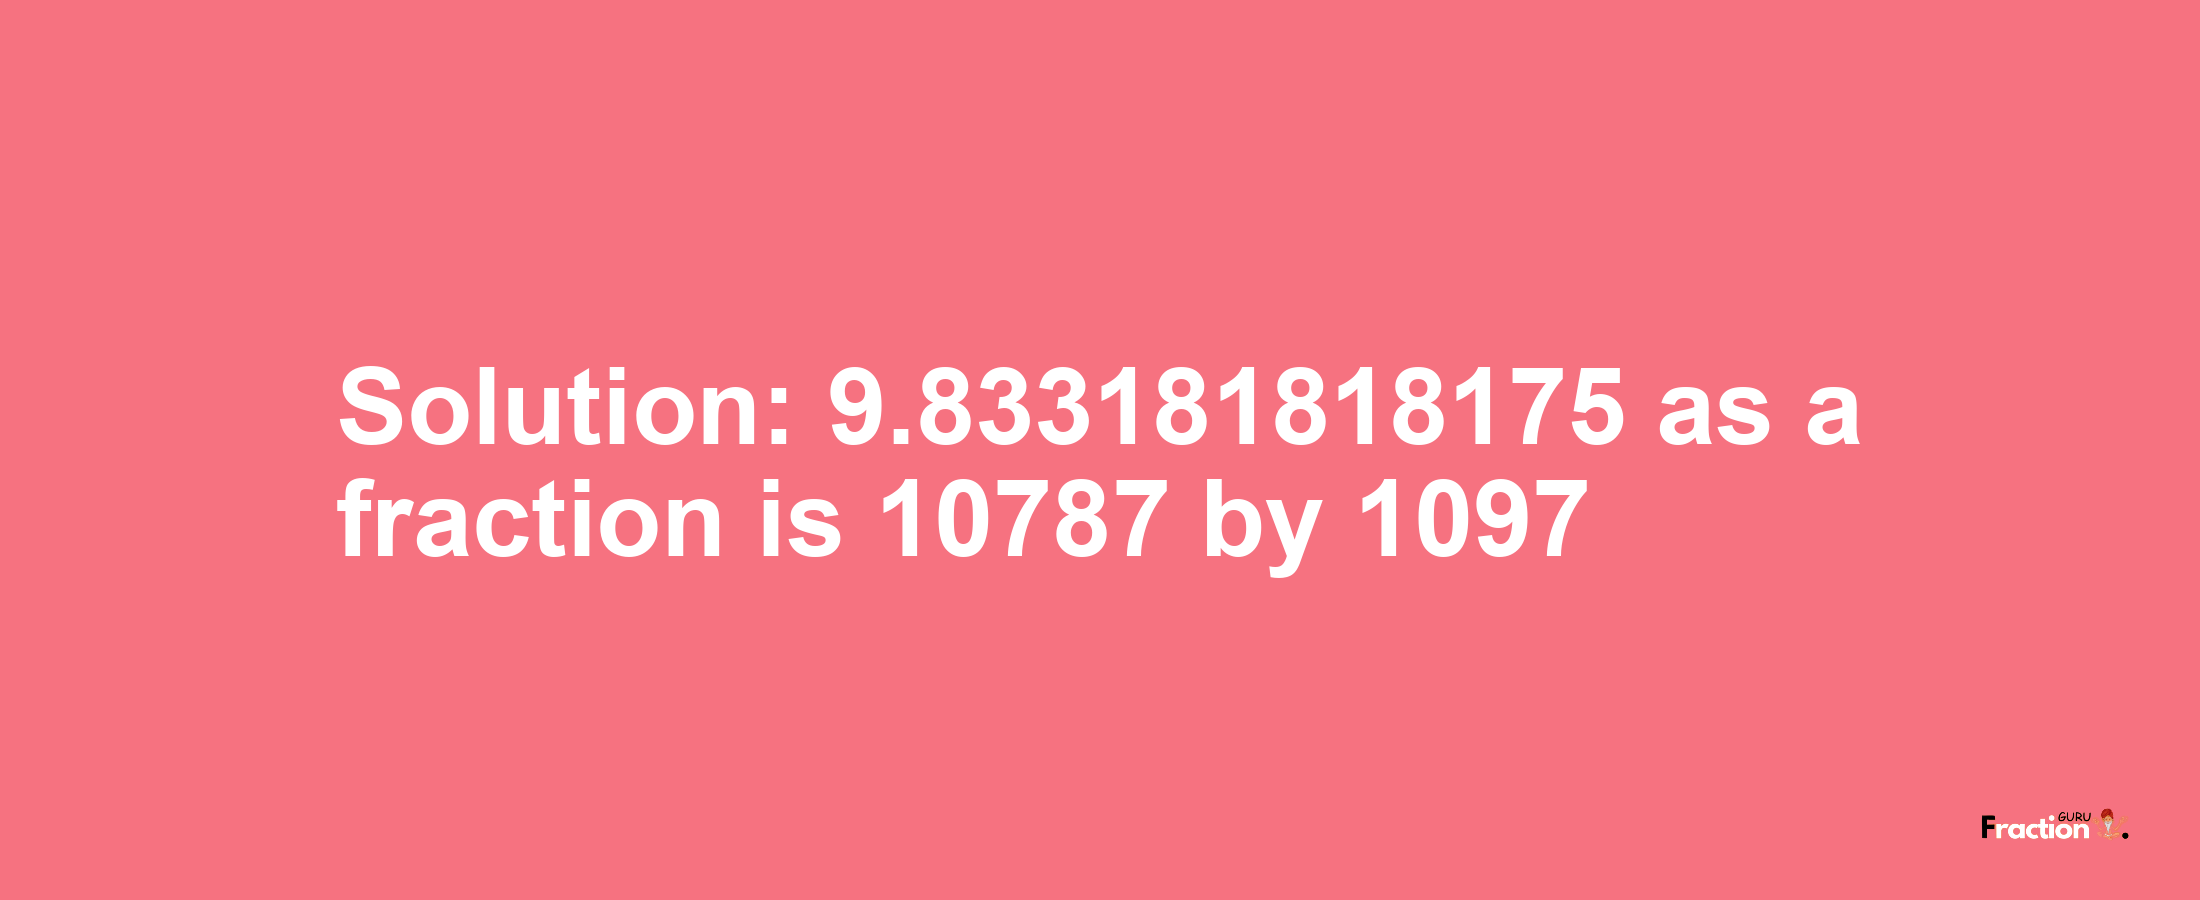 Solution:9.833181818175 as a fraction is 10787/1097